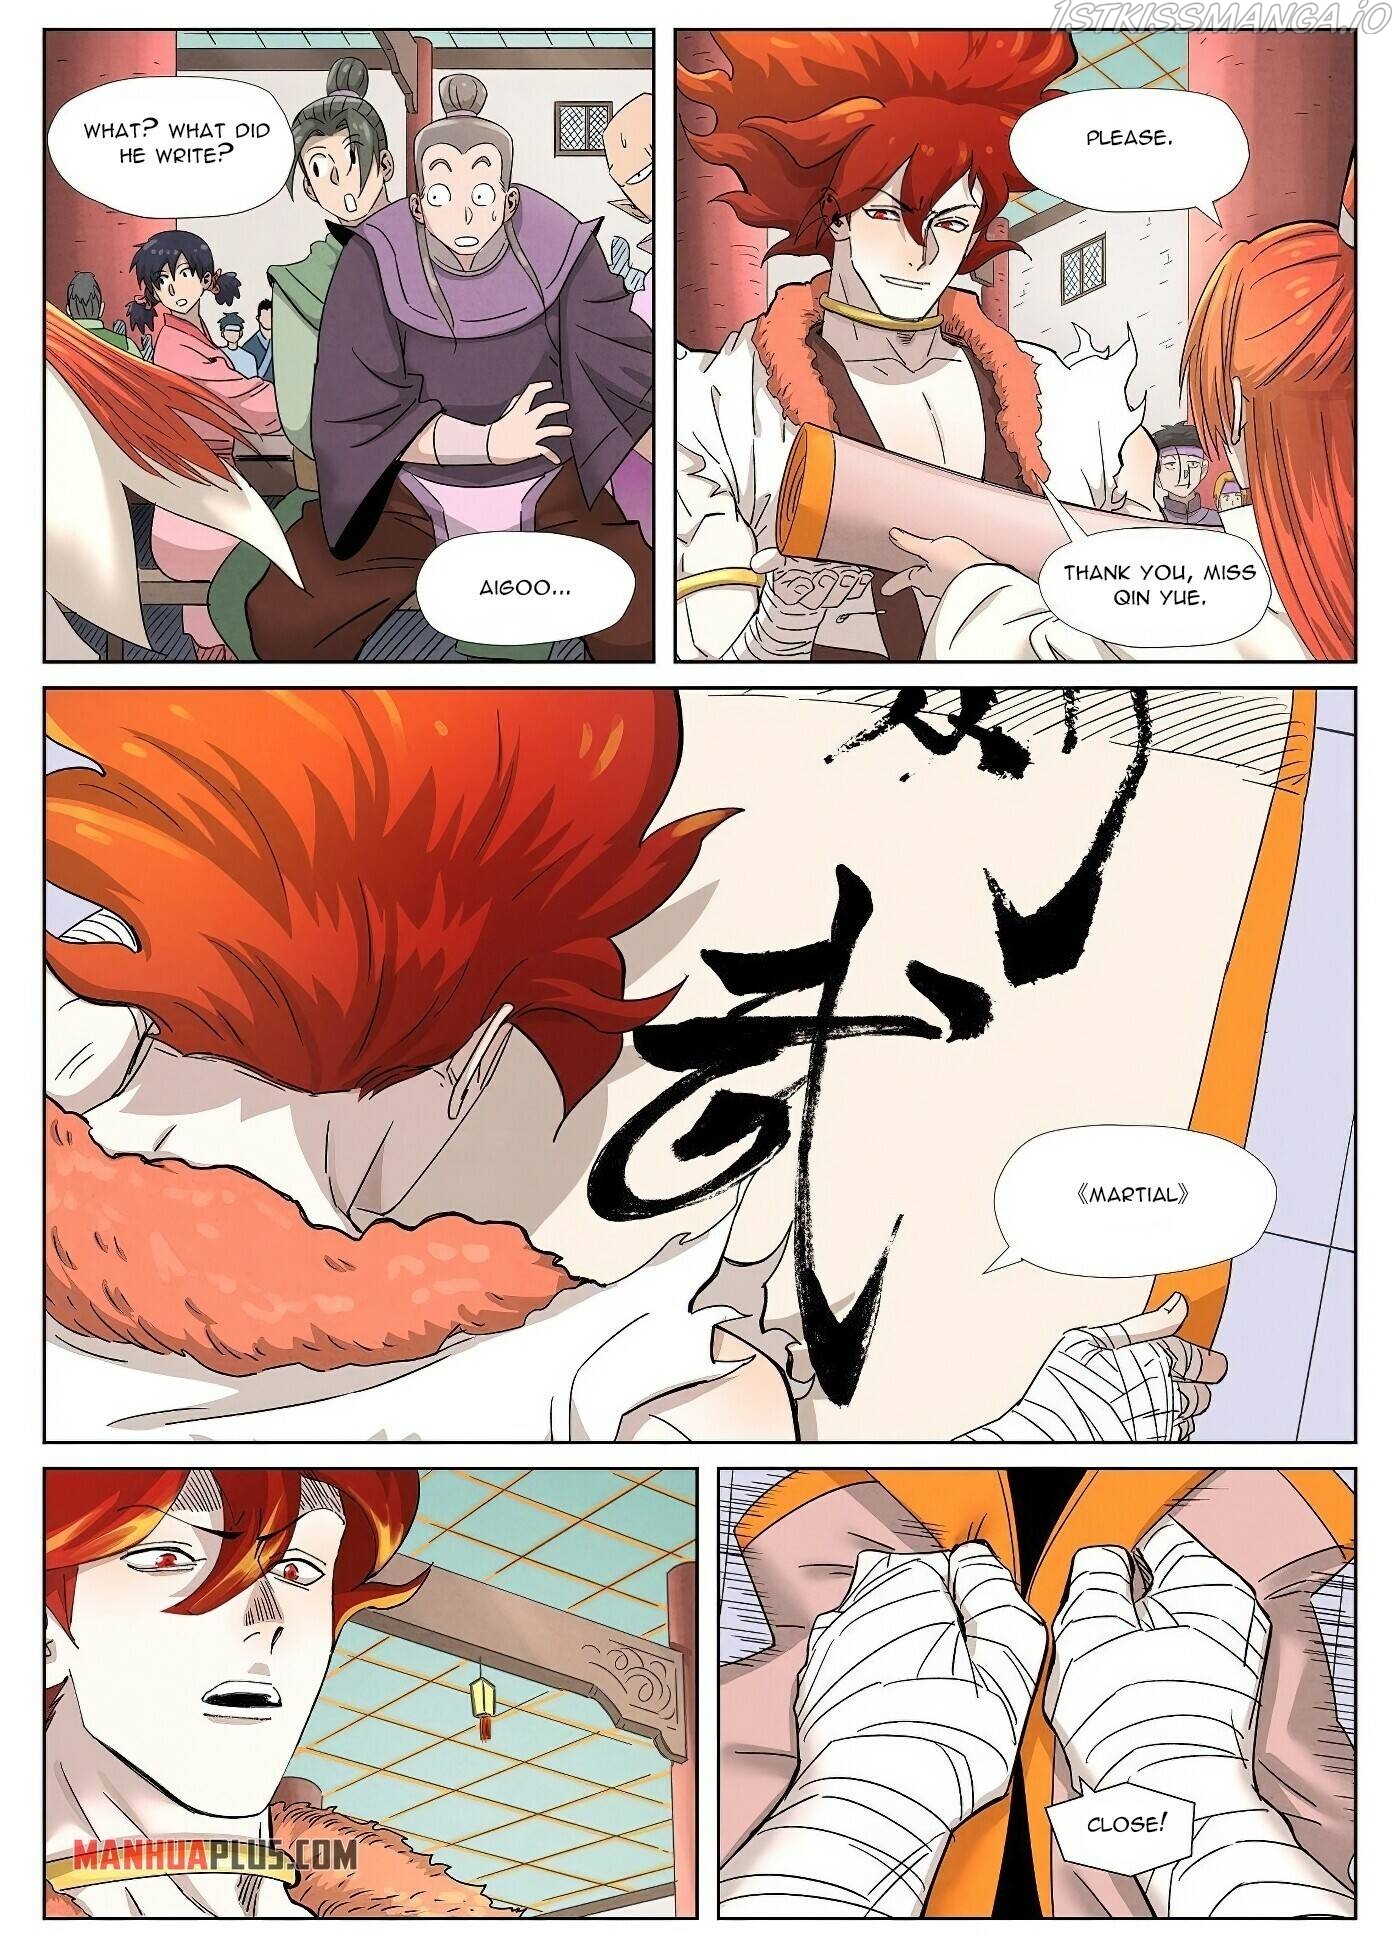 Tales of Demons and Gods Manhua Chapter 342.1 - Page 6